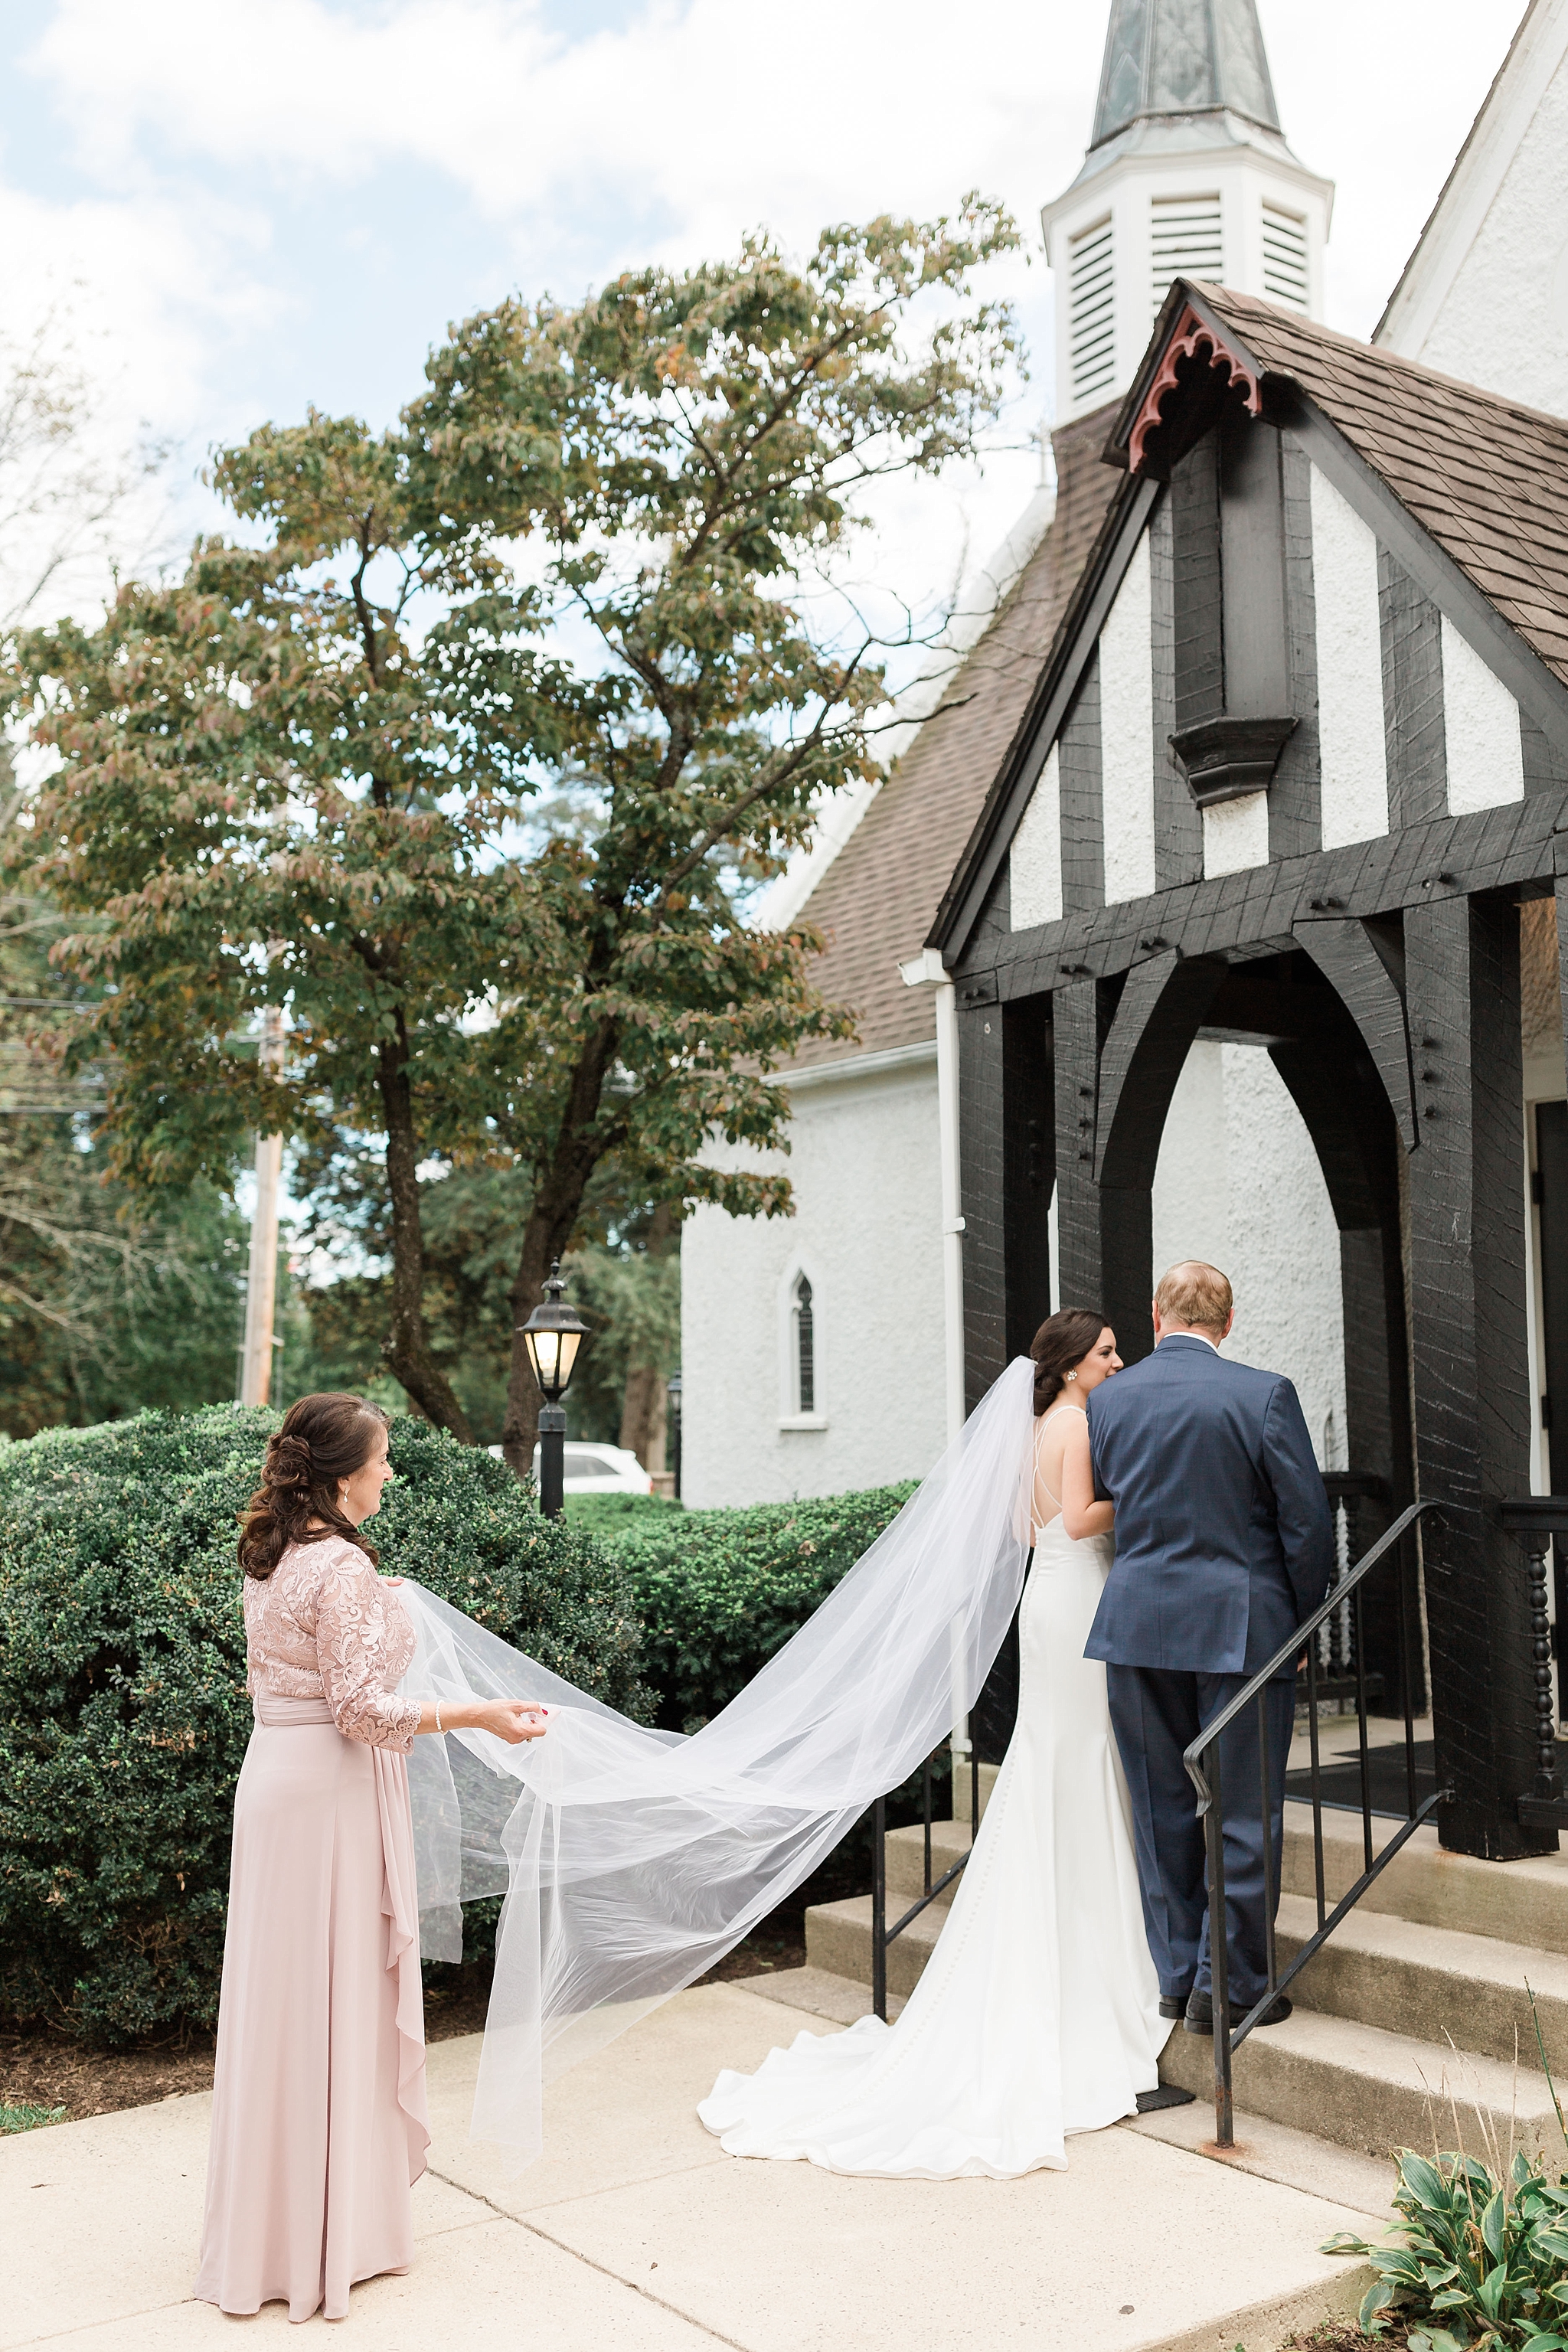 A chic and elegant wedding at The Rust Manor House in Leesburg, VA is full of handmade touches including a custom bar, dance floor, and hand-painted signage!